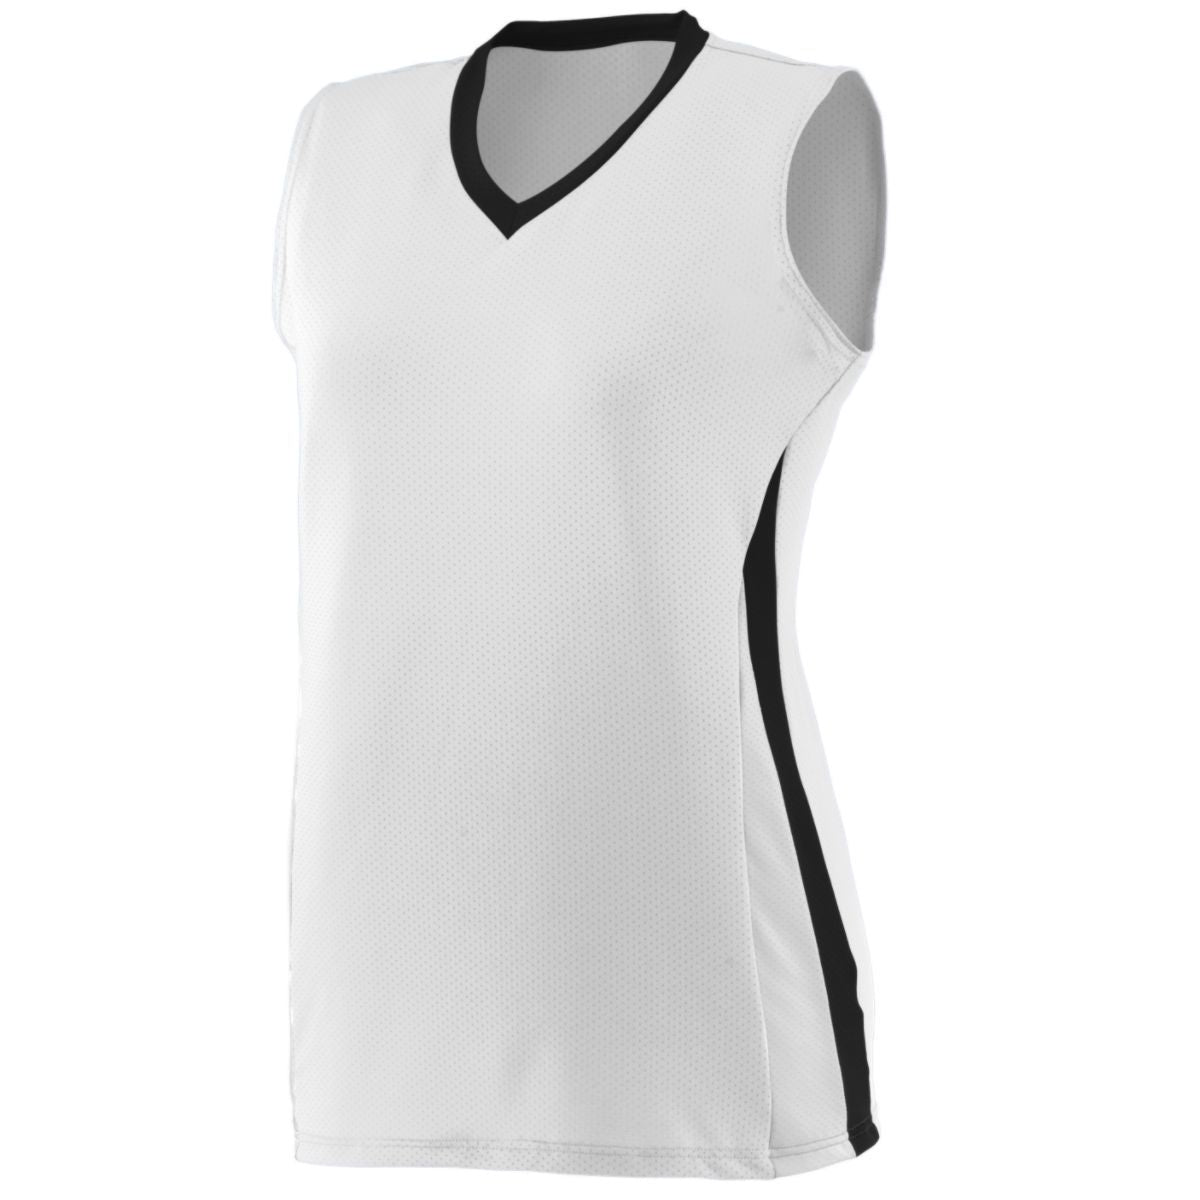 Augusta Sportswear Girls Tornado Jersey in White/Black/White  -Part of the Girls, Augusta-Products, Volleyball, Girls-Jersey, Shirts product lines at KanaleyCreations.com